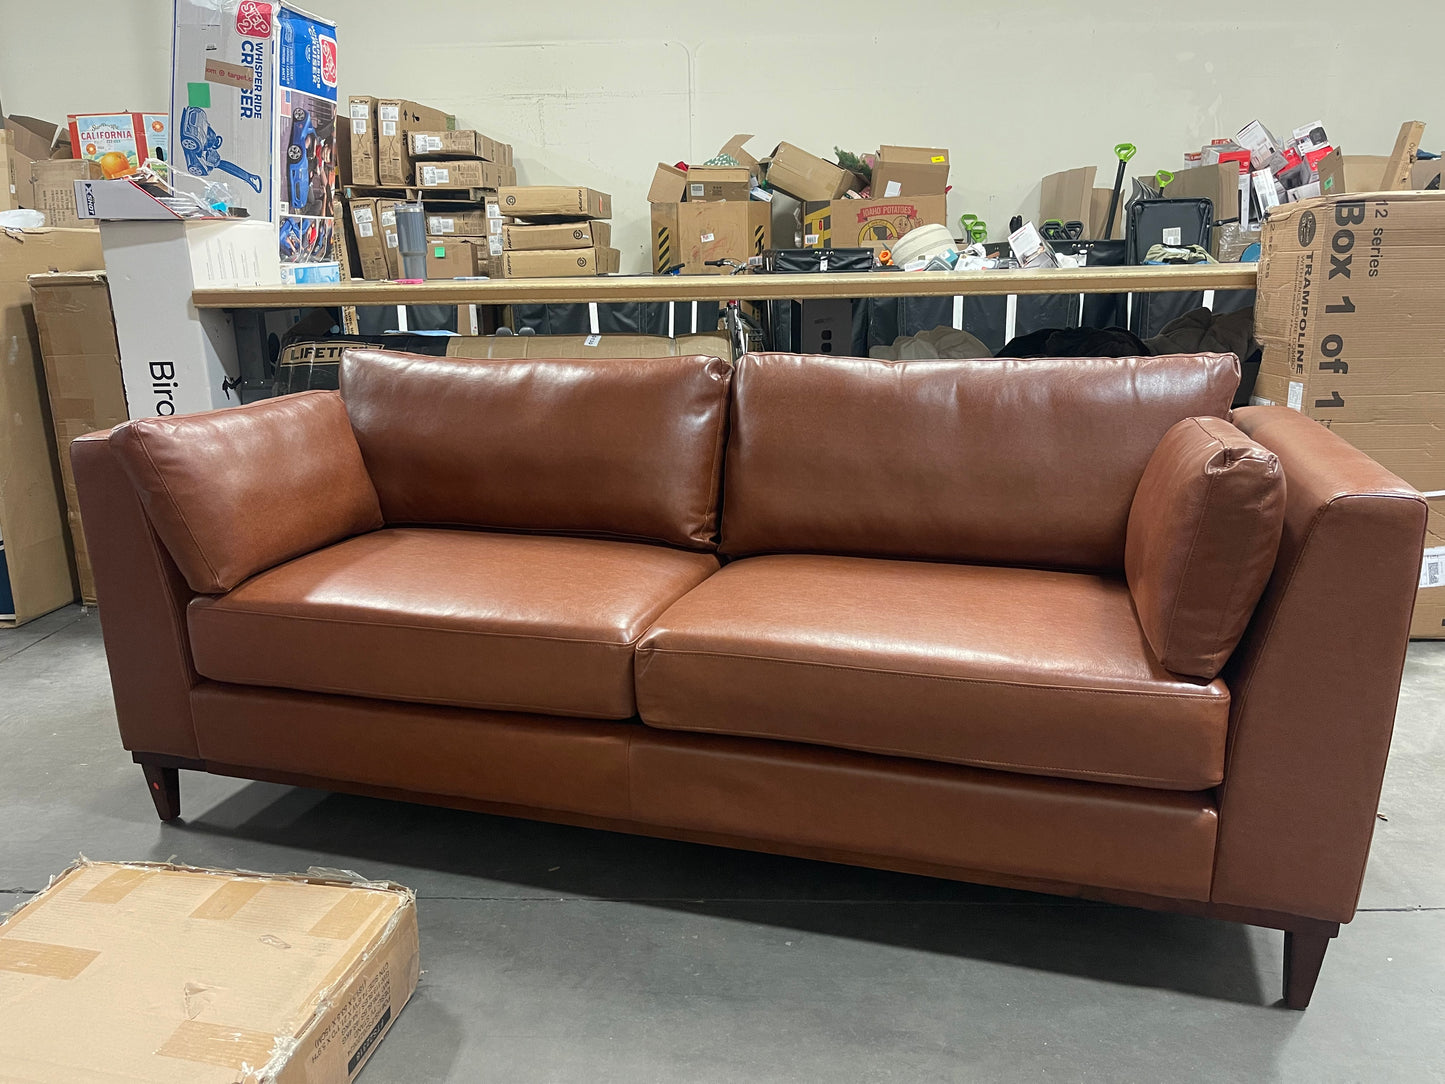 Warbler Faux Leather 3 Seater Sofa by Christopher Knight Home - Espresso/ Cognac (ALREADY BUILT) DAMAGED